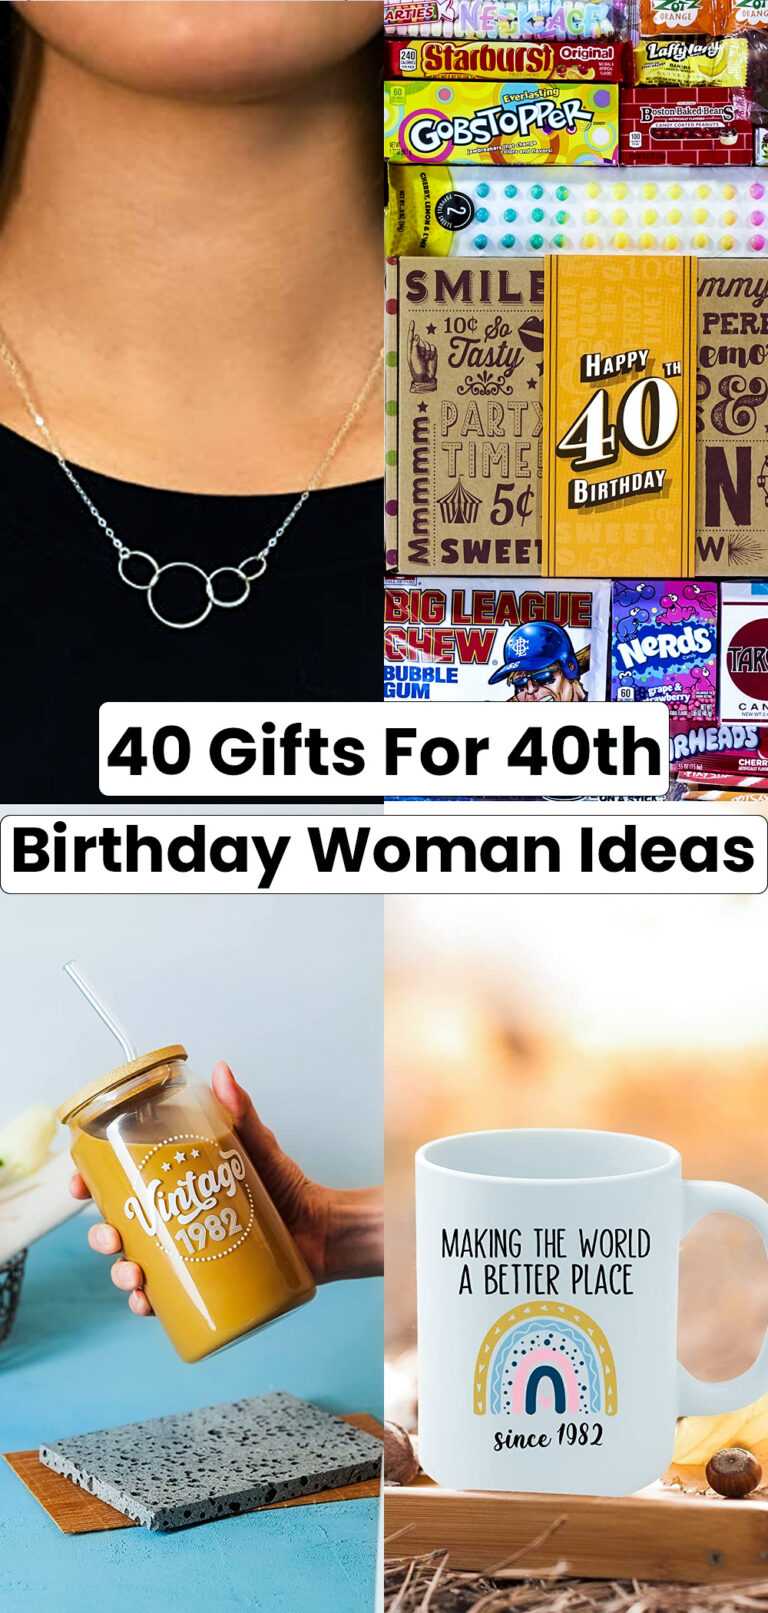 40 Gifts for 40th Birthday Woman Ideas